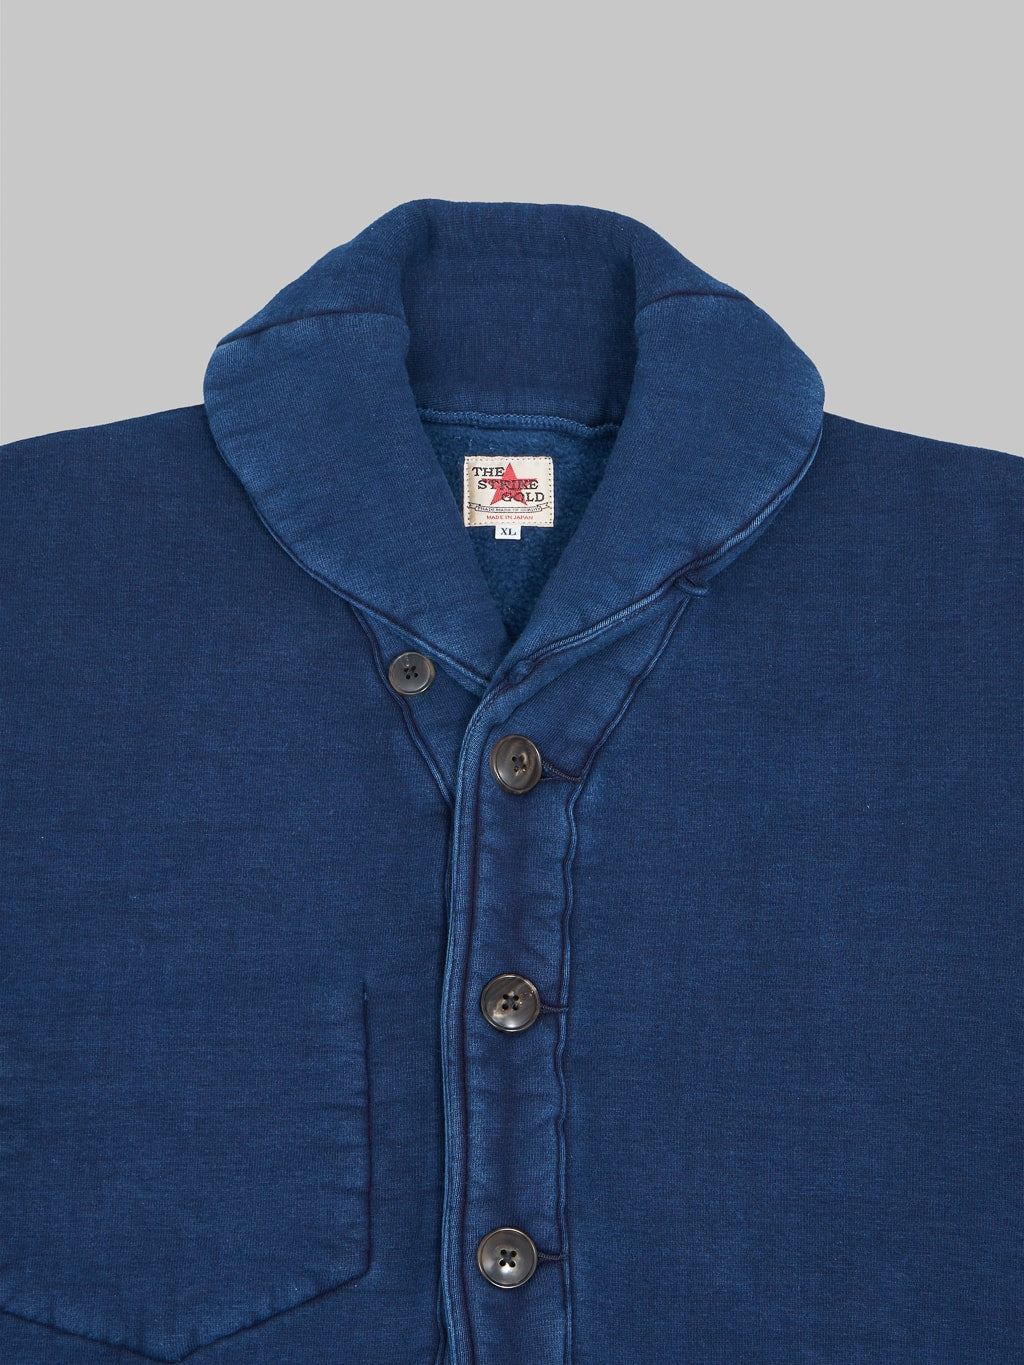 the strike gold indigo cardigan chest buttons